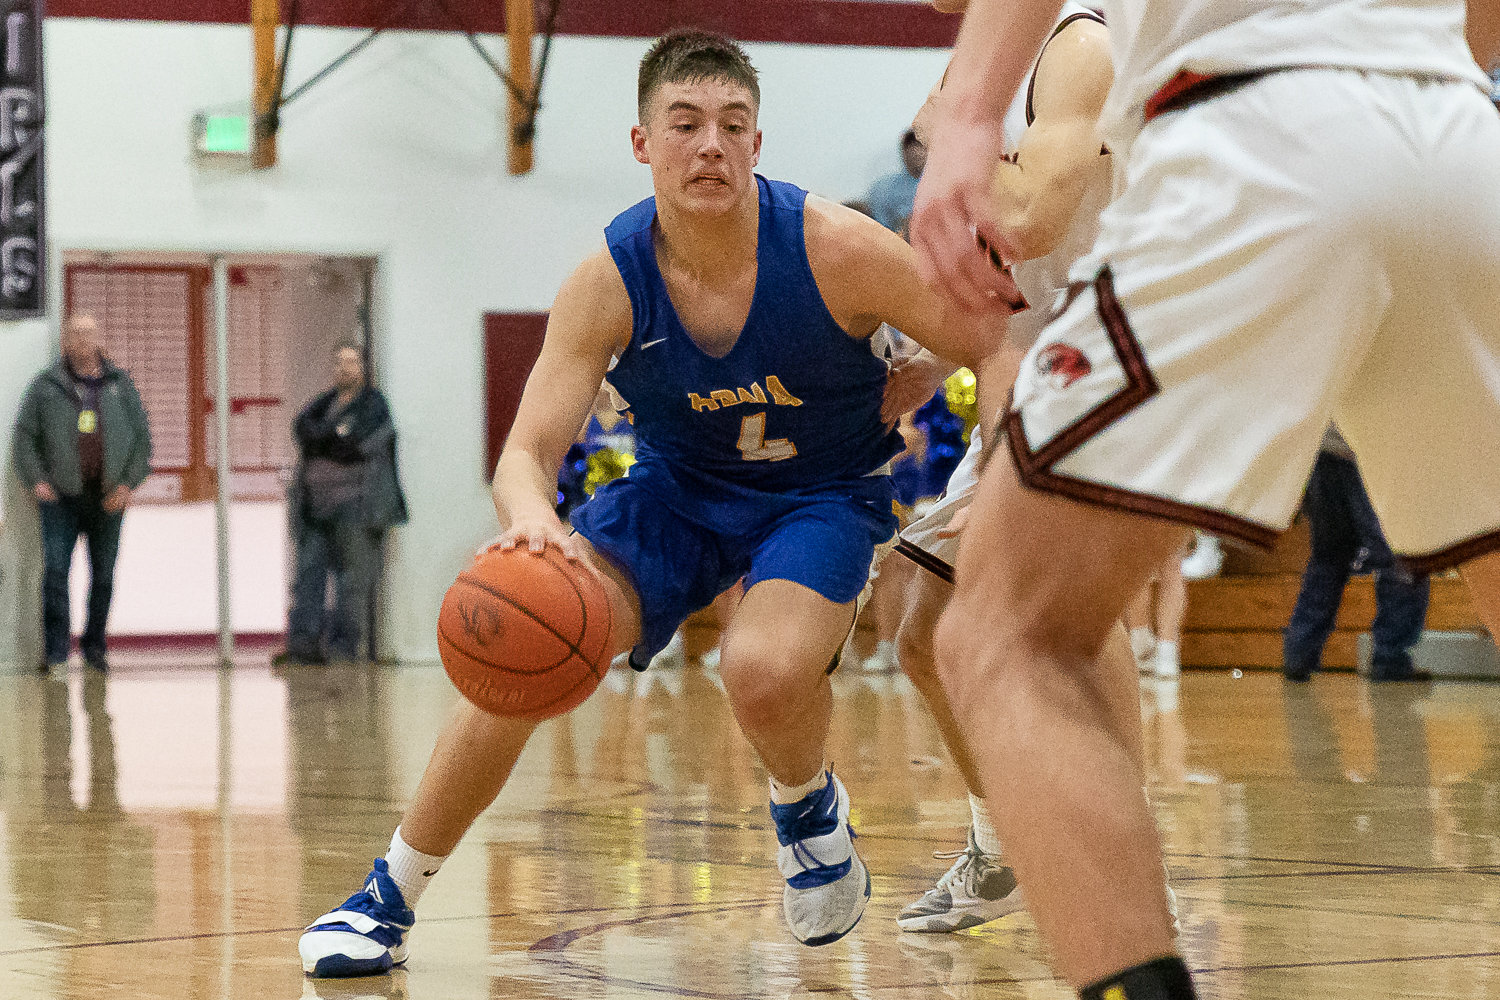 Adna forward Asher Guerrero drives against Napavine in the 2B District 4 quarterfinals at W.F. West Feb. 8.